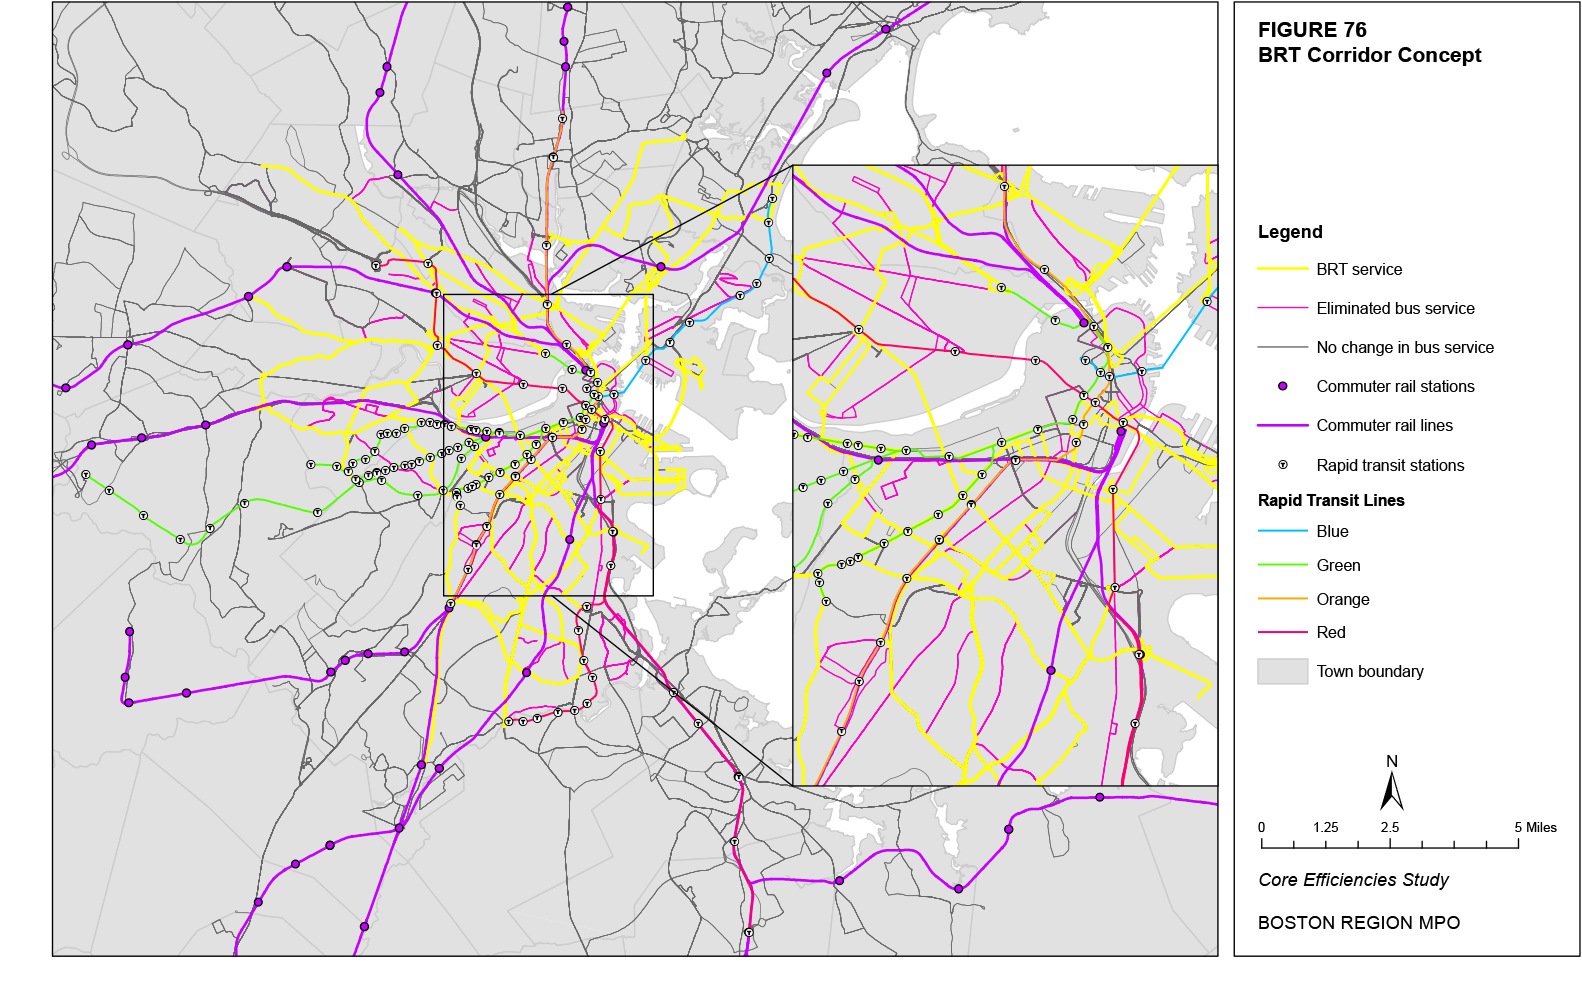 This map shows the MBTA bus, rapid transit, and commuter rail network with the proposed changes in the BRT corridor concept.